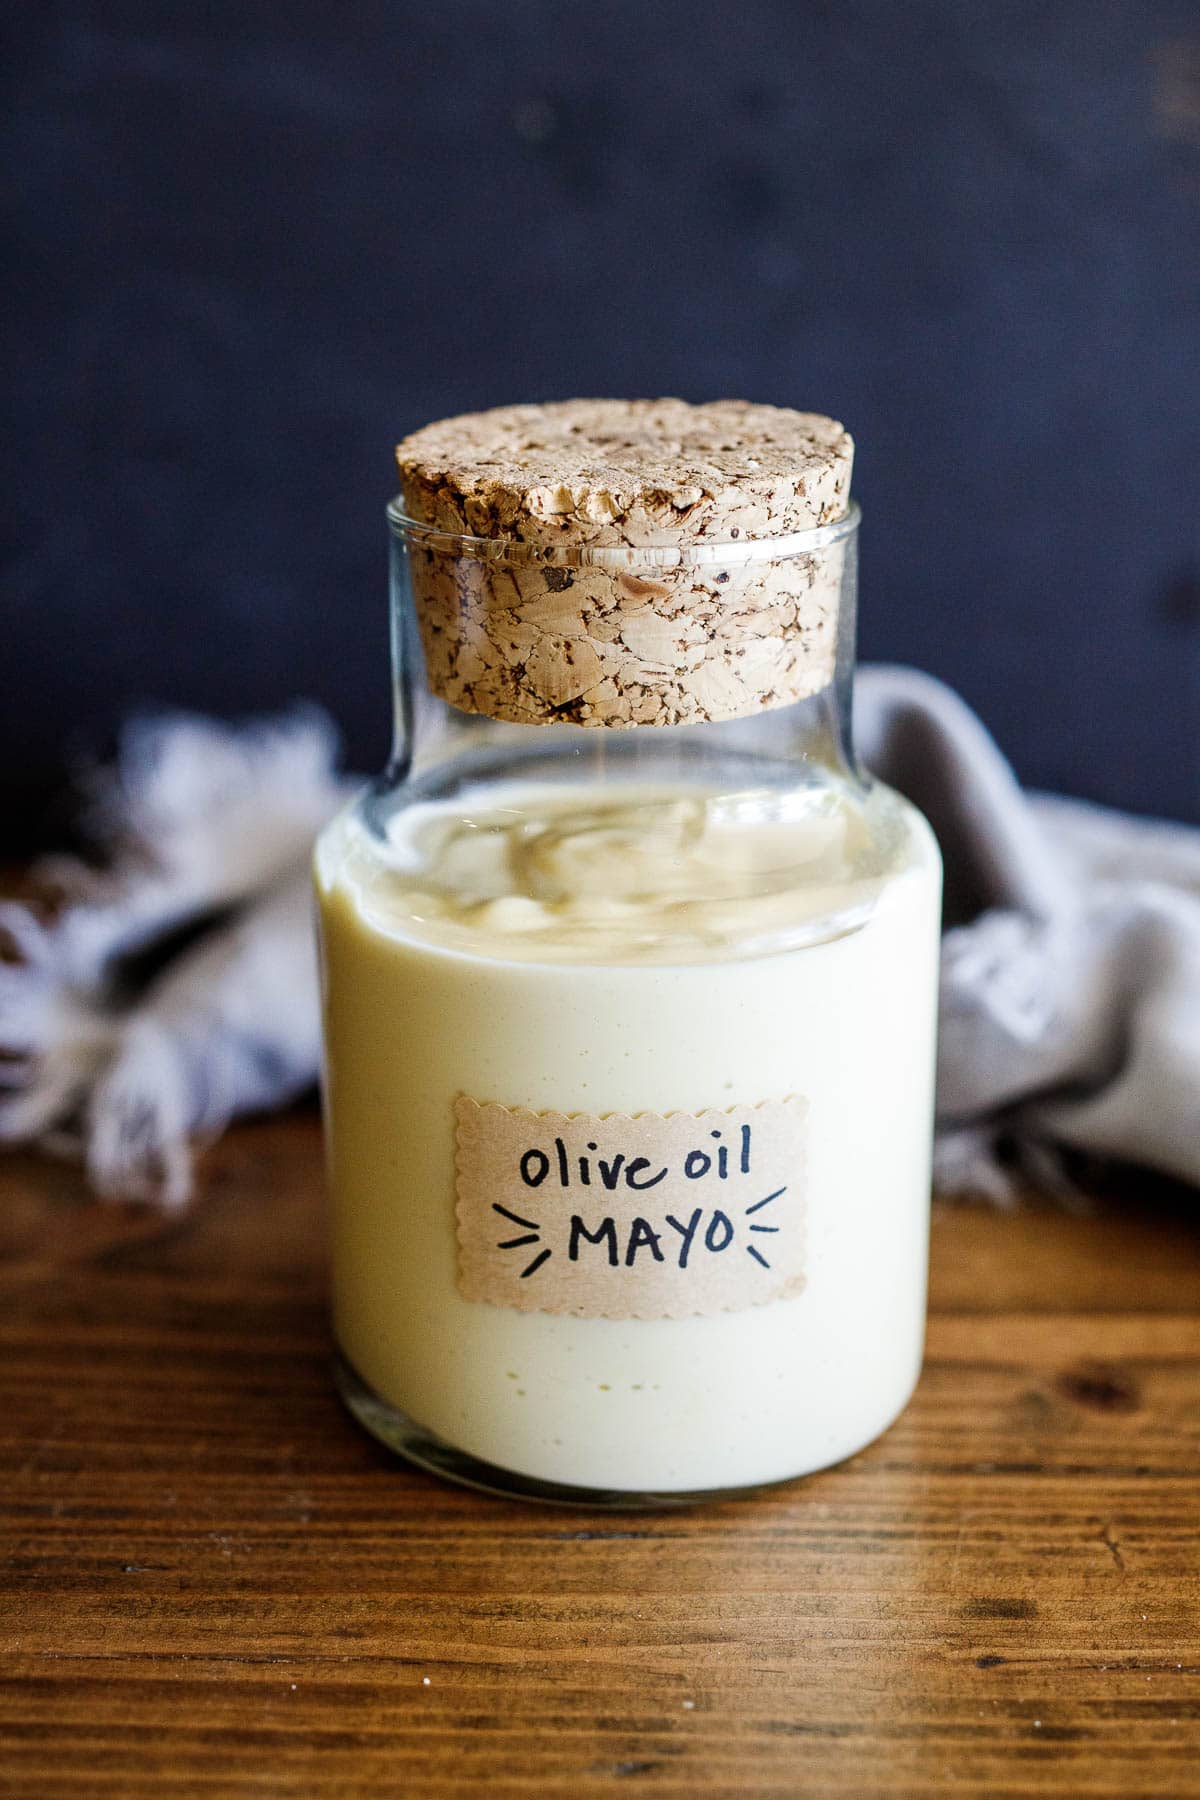 This simple, easy mayonnaise recipe is made with olive oil and can be made in a blender, food processor, or whisked by hand.  Keep it in the fridge for up to 3 weeks!